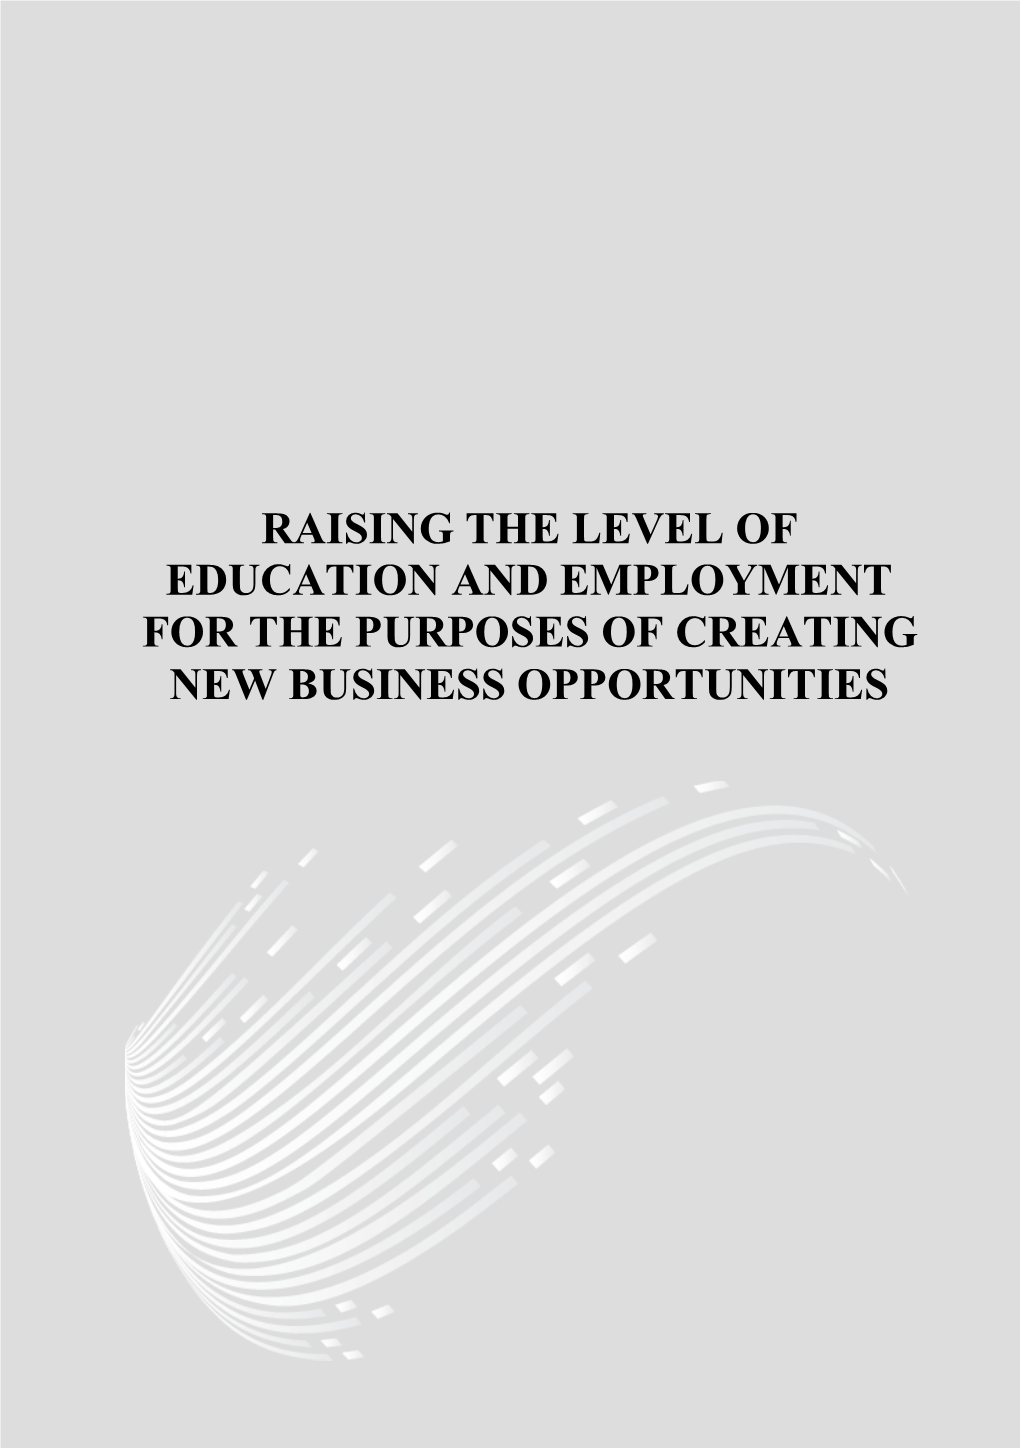 Raising the Level of Education and Employment for the Purposes of Creating New Business Opportunities